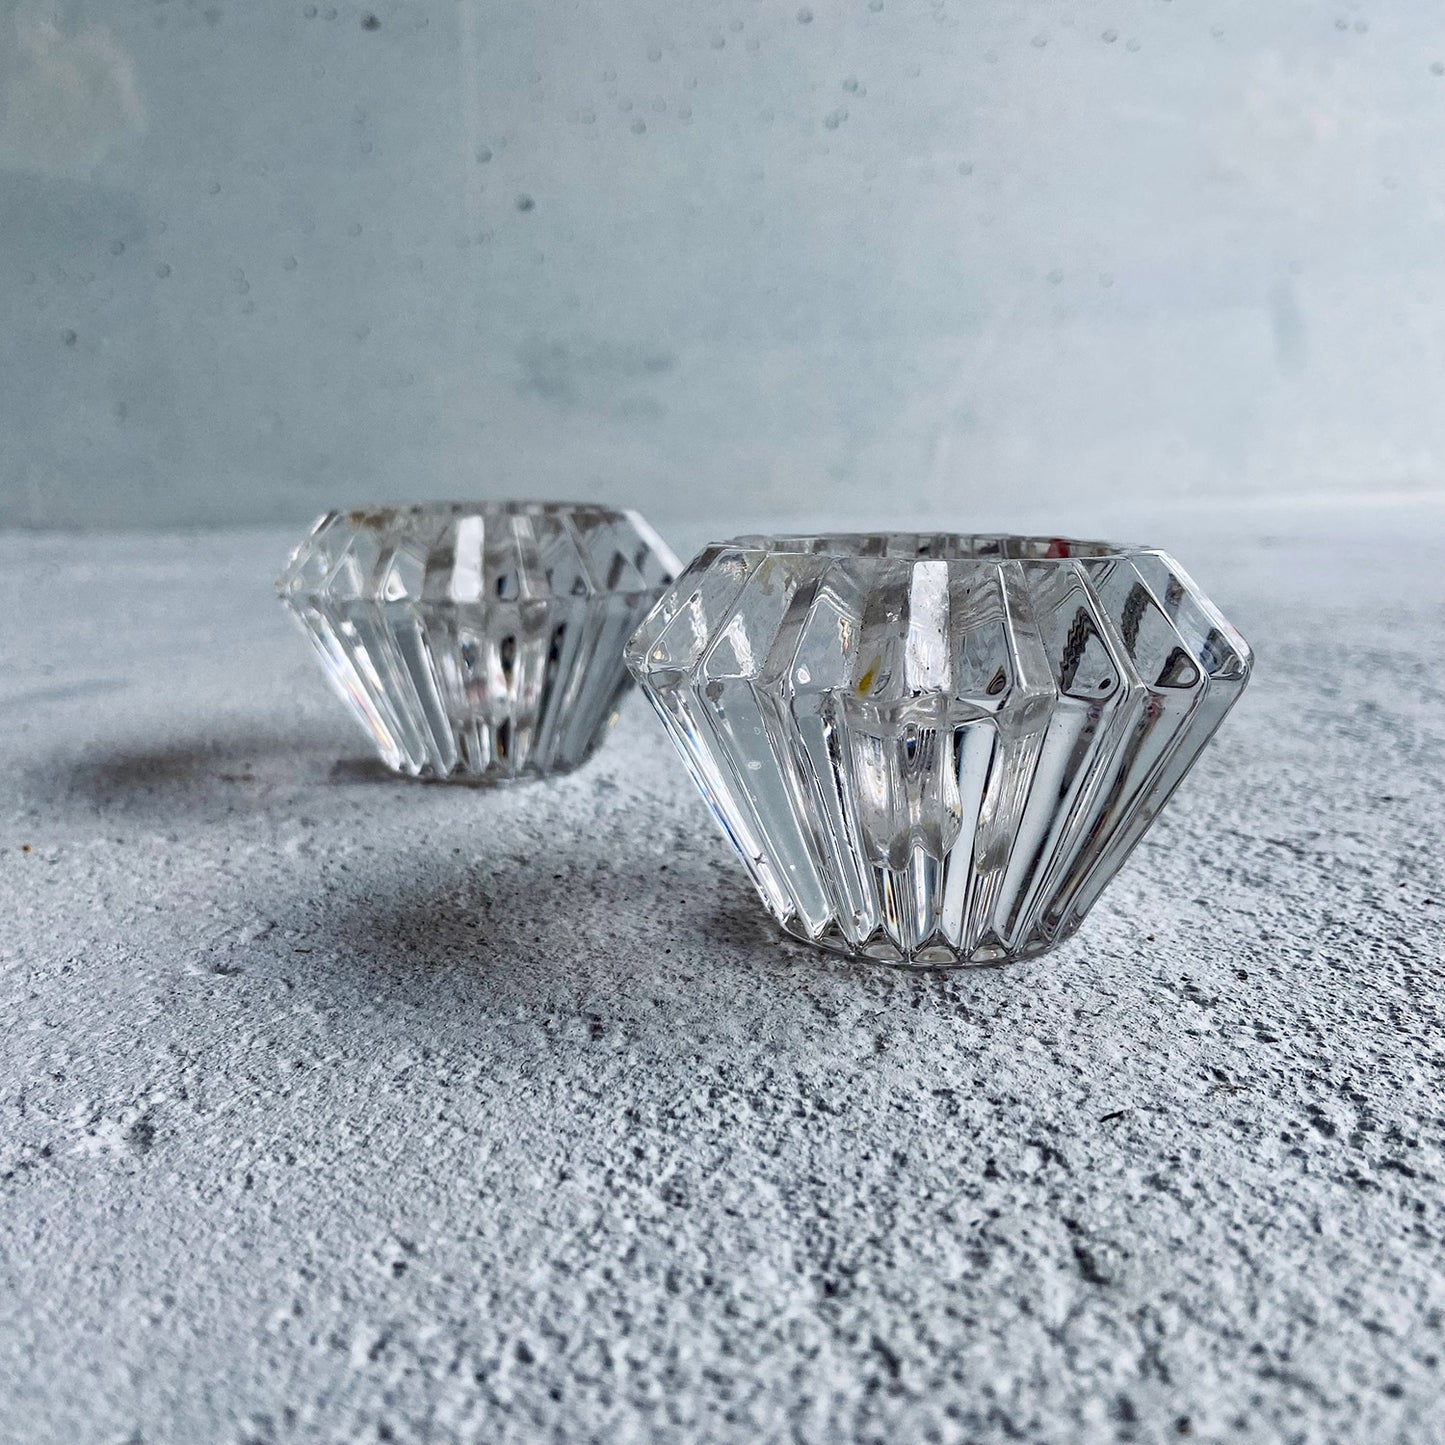 Maastricht Glas, 2x vintage glass (crystal) star-shaped candlestick-holders, The Netherlands, 1950s - 1960s